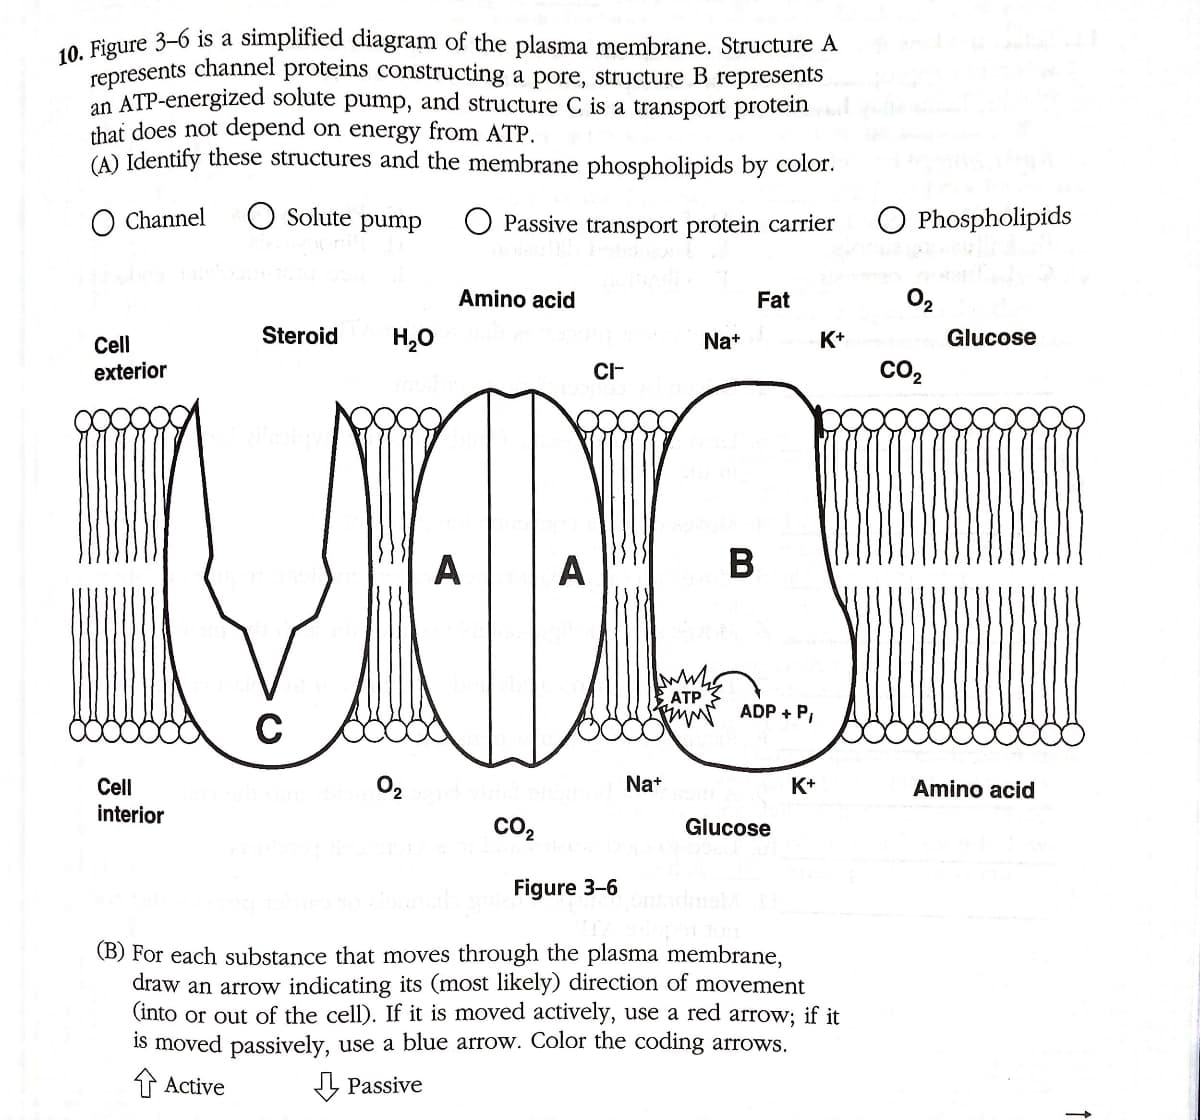 represents channel proteins constructing a pore, structure B represents
10 Figure 3-6 is a simplified diagram of the plasma membrane. Structure A
an ATP-energized solute pump, and structure C is a transport protein
that does not depend on energy from ATP.
(A) Identify these structures and the membrane phospholipids by color.
O Channel
O Solute pump
Passive transport protein carrier
O Phospholipids
Amino acid
Fat
O2
Steroid
H,0
Na+
K+
Glucose
Cell
exterior
CI-
co,
VIA
ATP
mM ADP + P,
C
Cell
Nat
K+
Amino acid
interior
co2
Glucose
Figure 3-6
(B) For each substance that moves through the plasma membrane,
draw an arrow indicating its (most likely) direction of movement
(into or out of the cell). If it is moved actively, use a red arrow; if it
is moved passively, use a blue arrow. Color the coding arrows.
介Active
Passive
